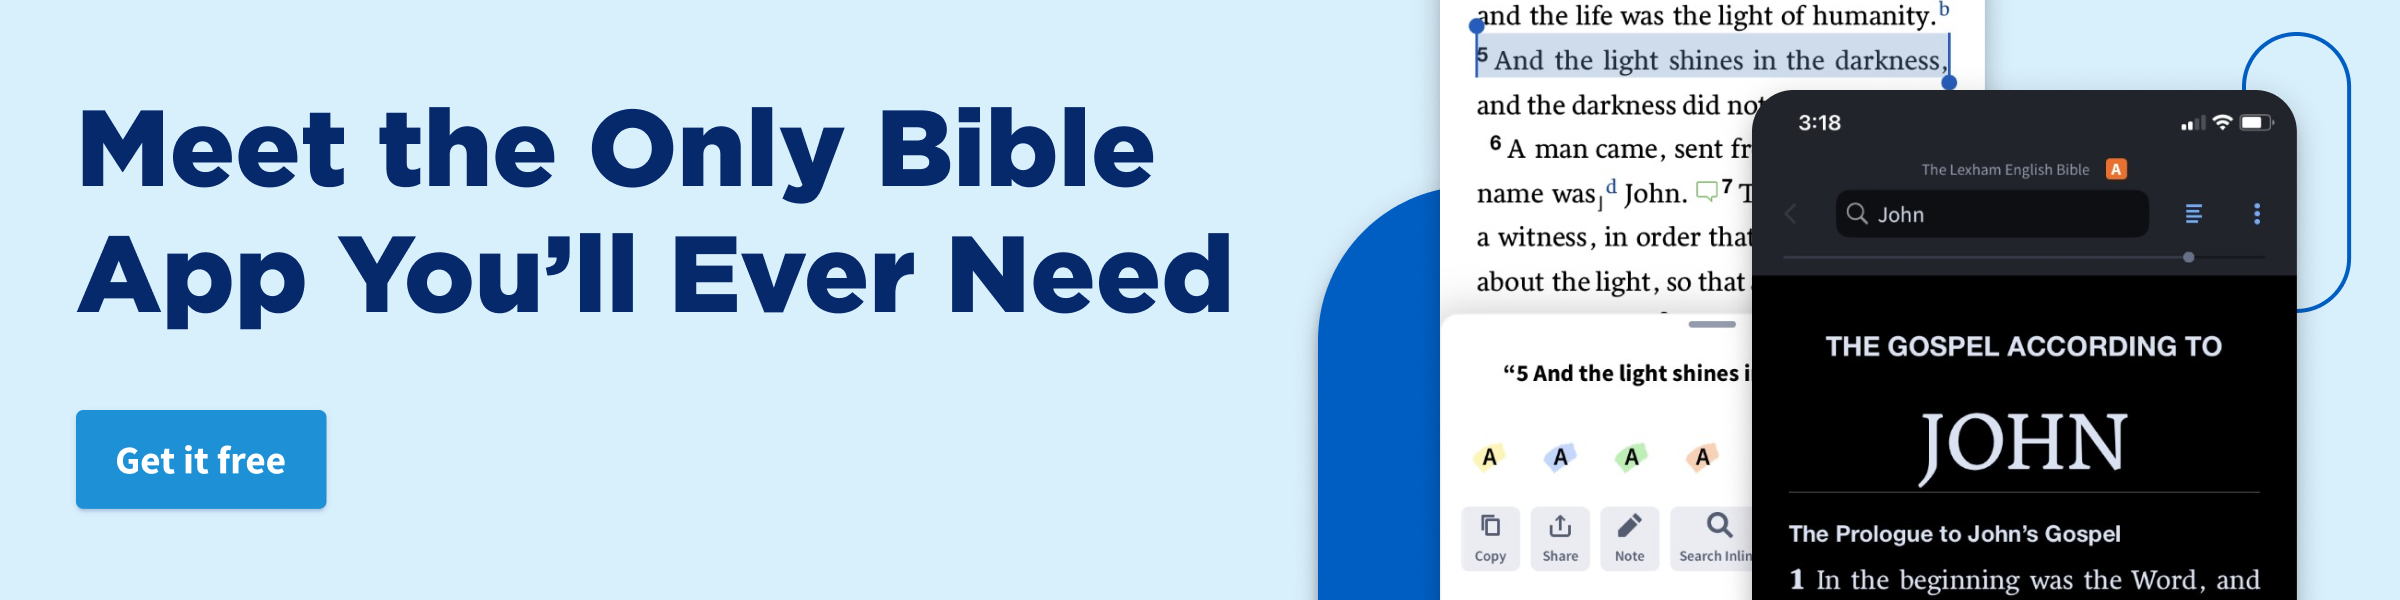 Meet the Only Bible App You'll Ever Need. Get it free